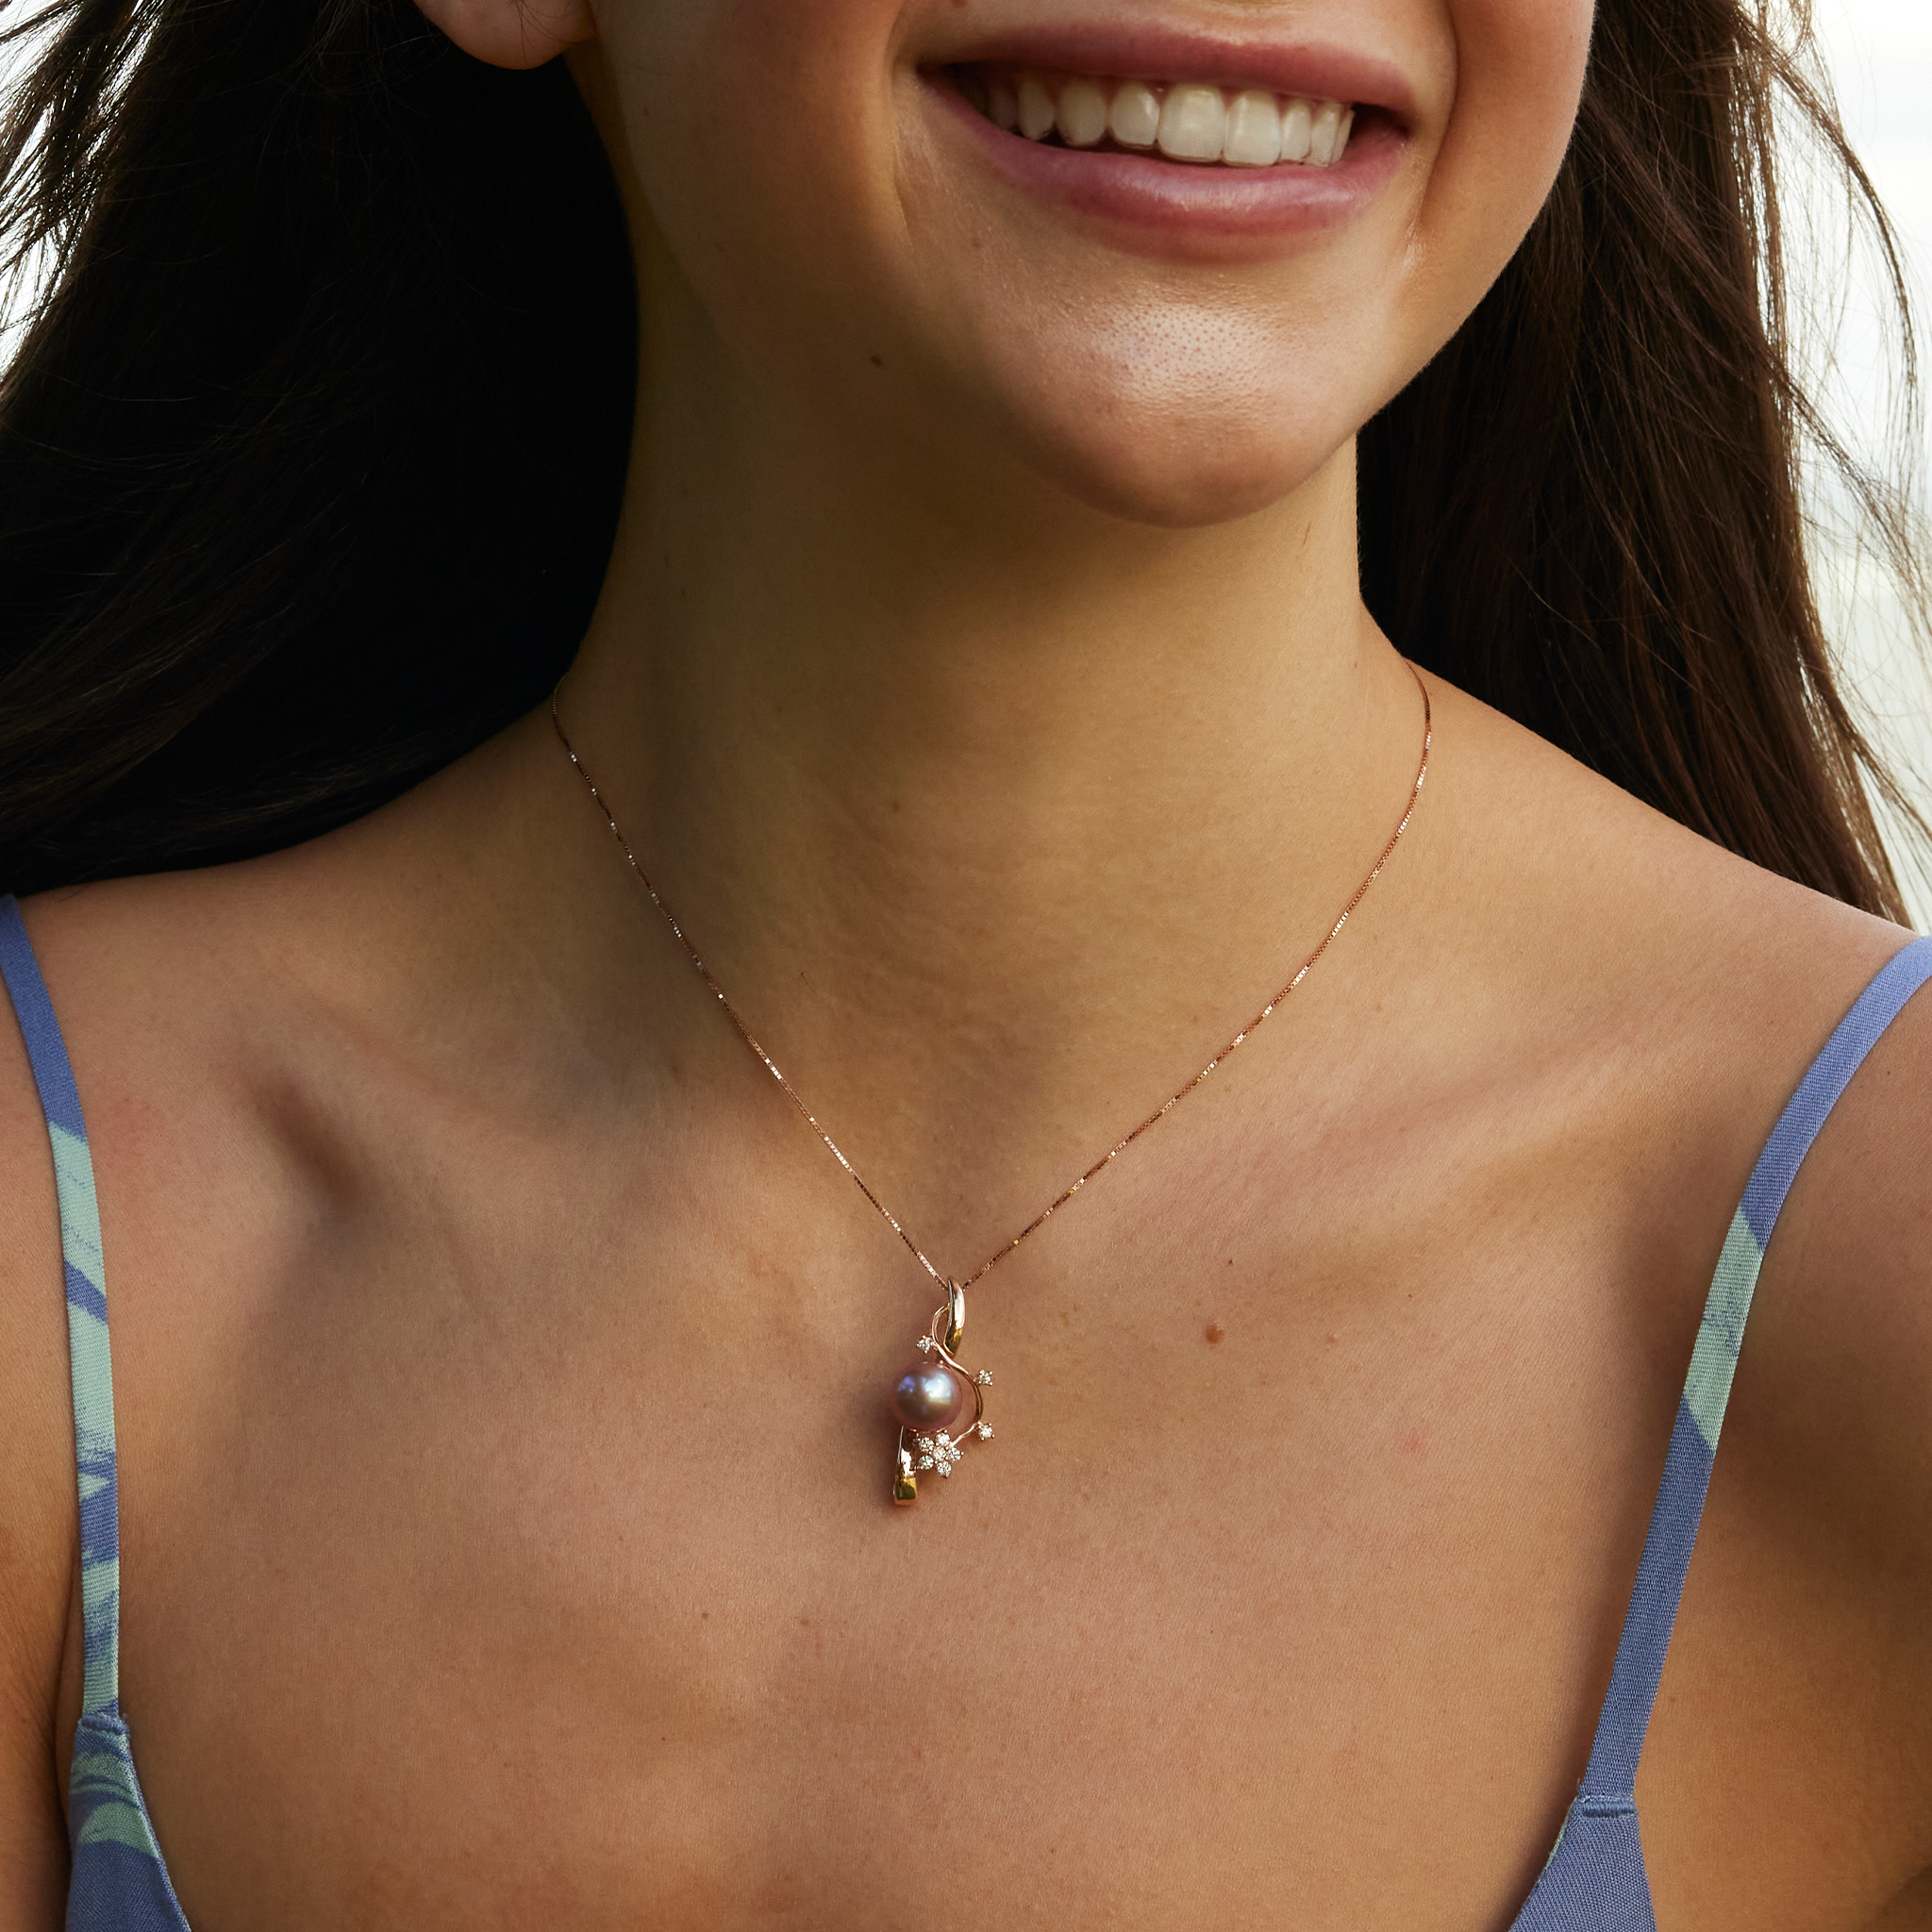 Ultraviolet Freshwater Pearl Pendant in Rose Gold with Diamonds - 10-11mm